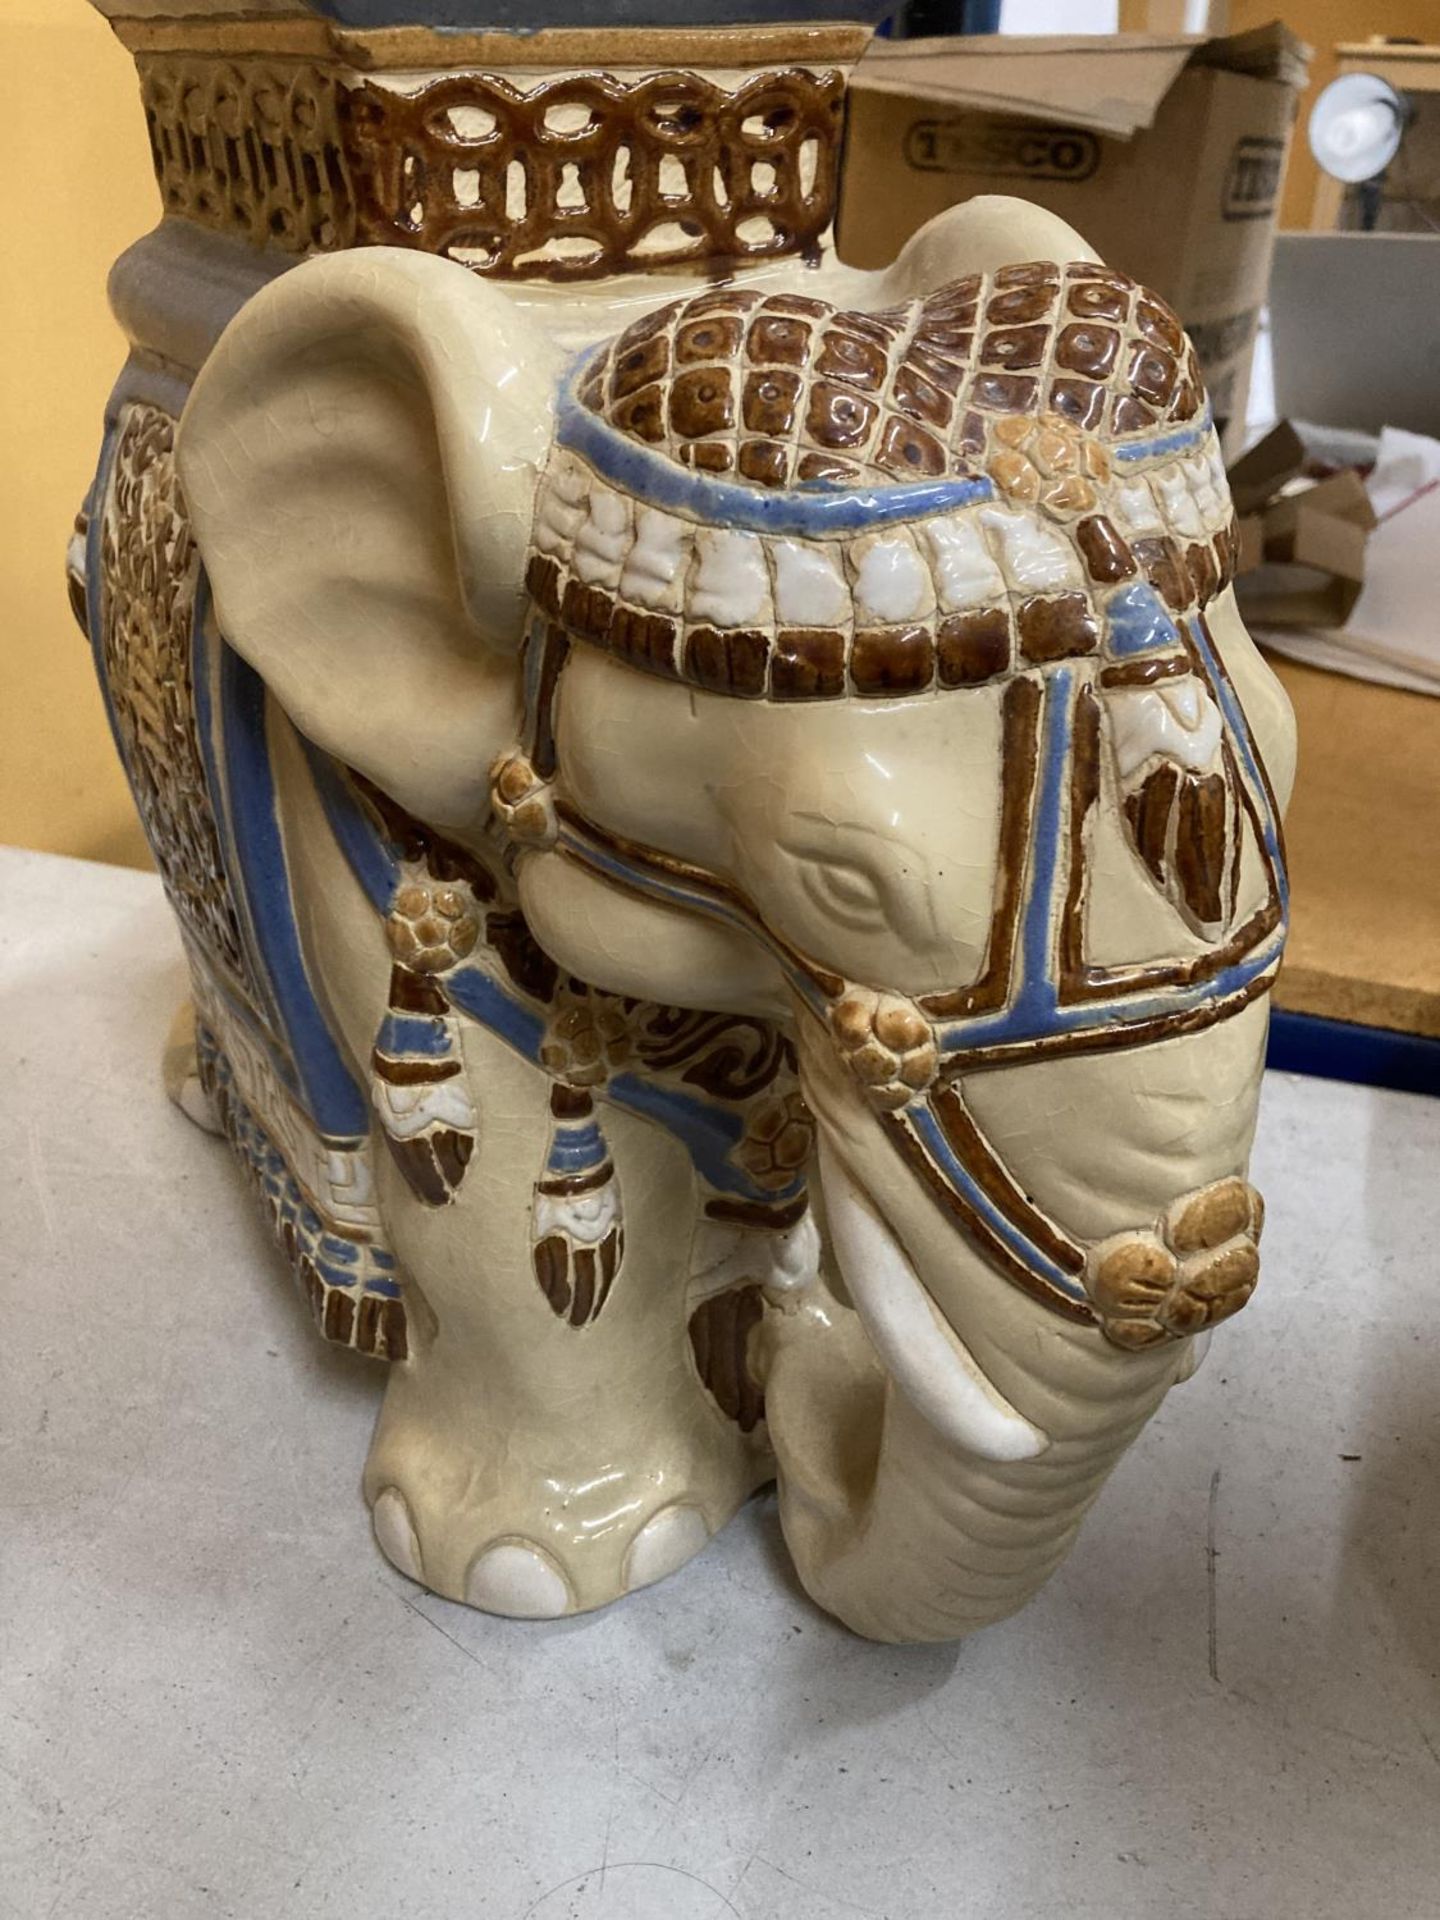 A LARGE CERAMIC ELEPHANT STAND/SEAT - Image 4 of 4